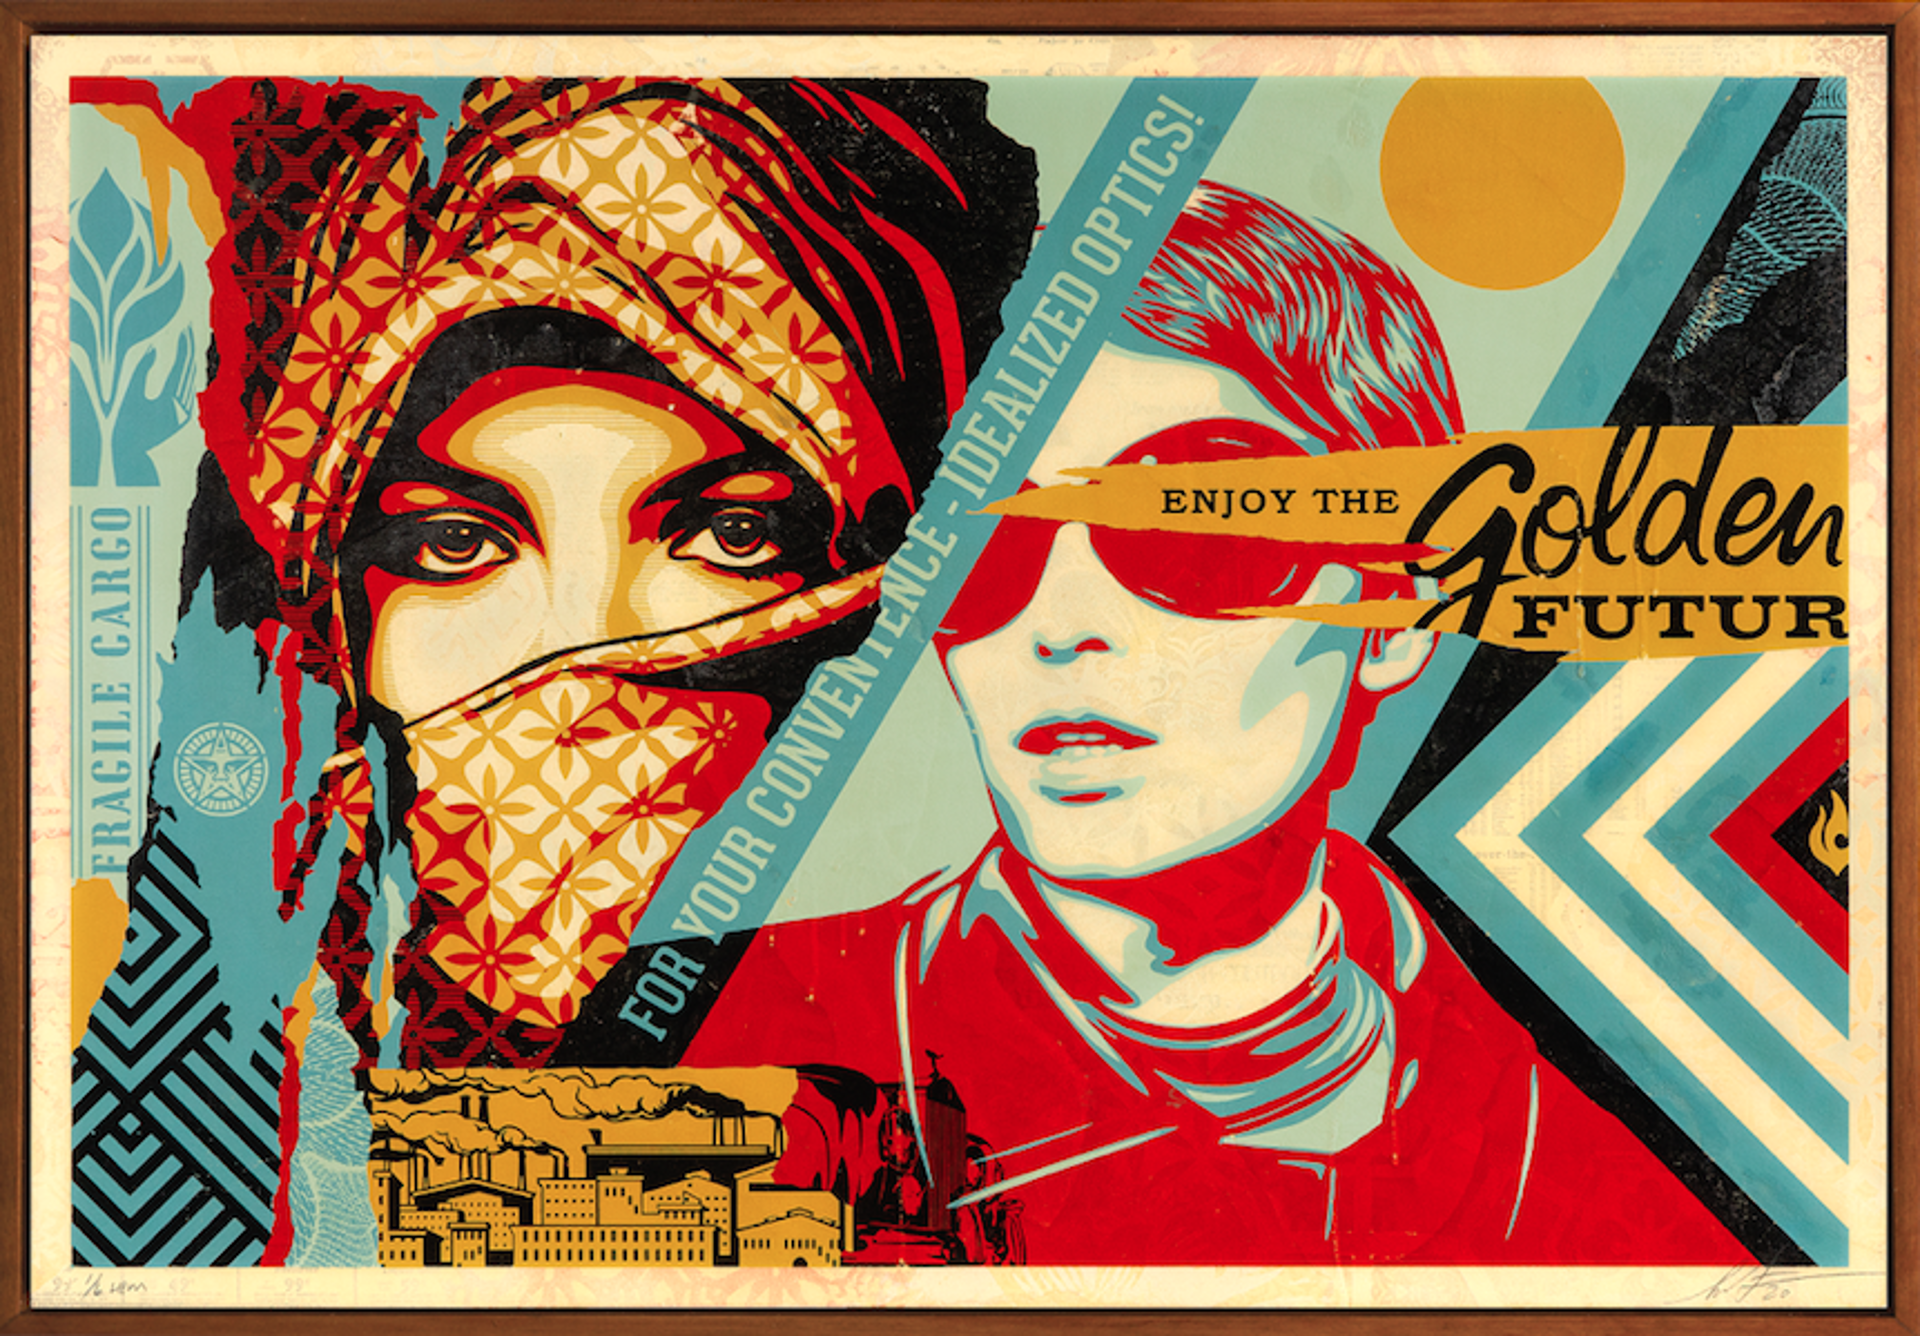 Golden Future by Shepard Fairey / Limited editions